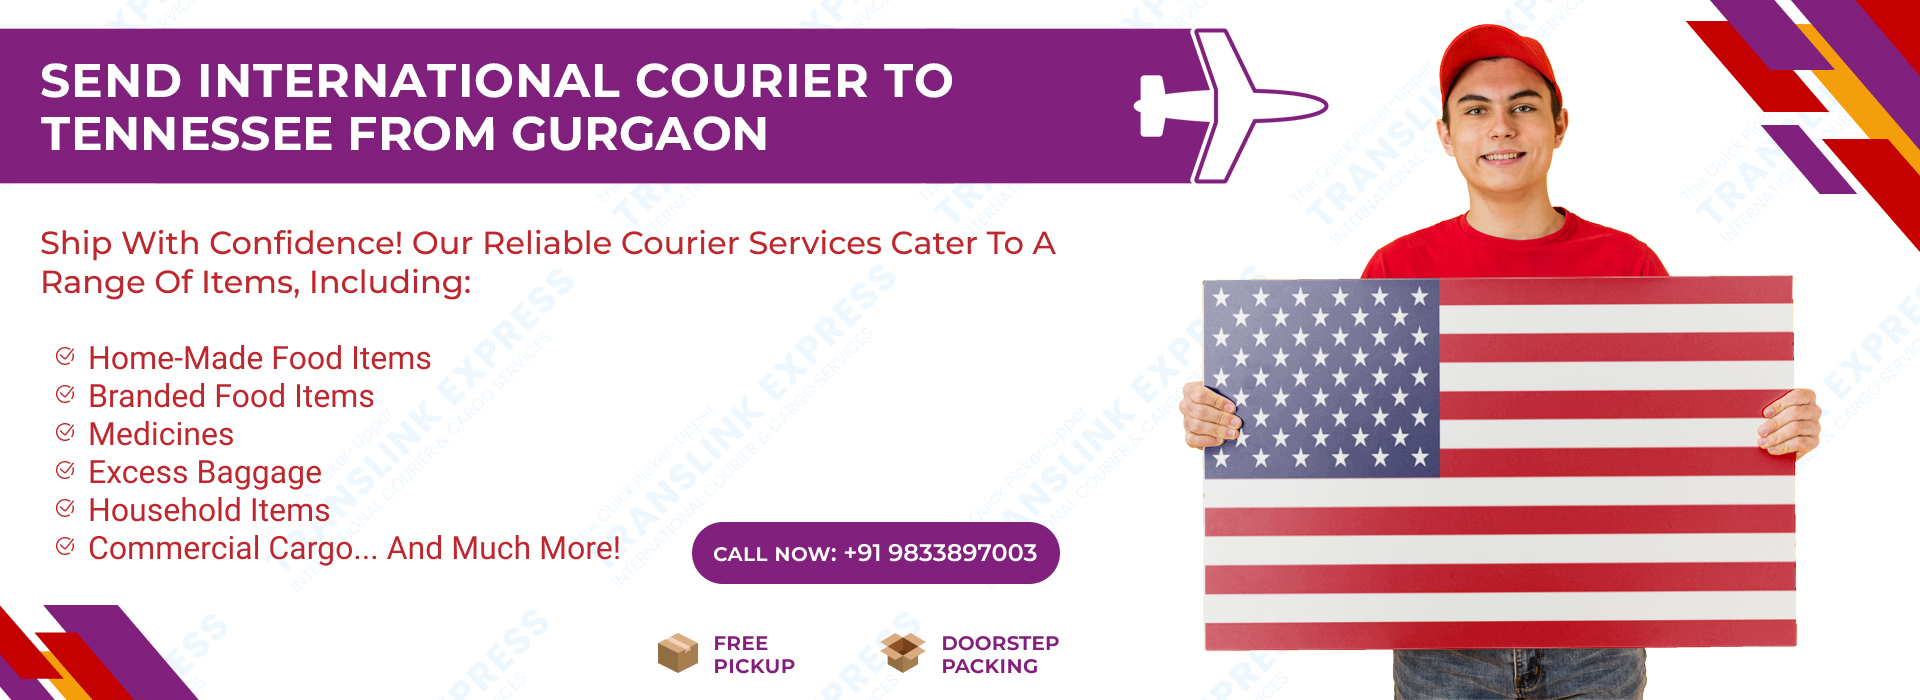 Courier to Tennessee From Gurgaon